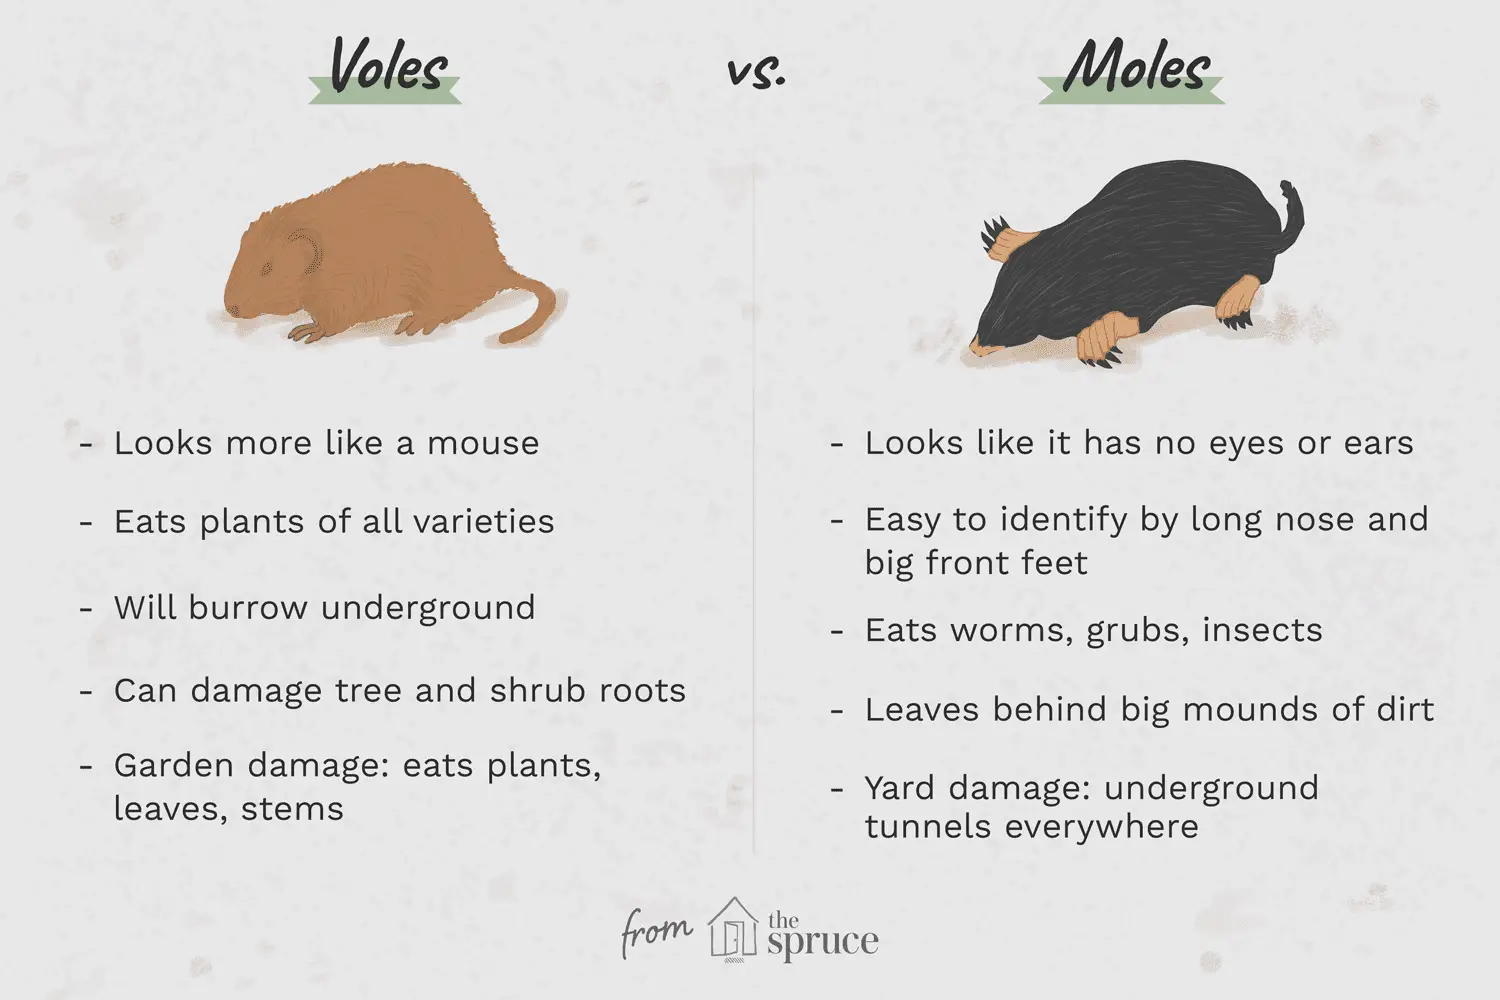 What Are Moles And Mice?